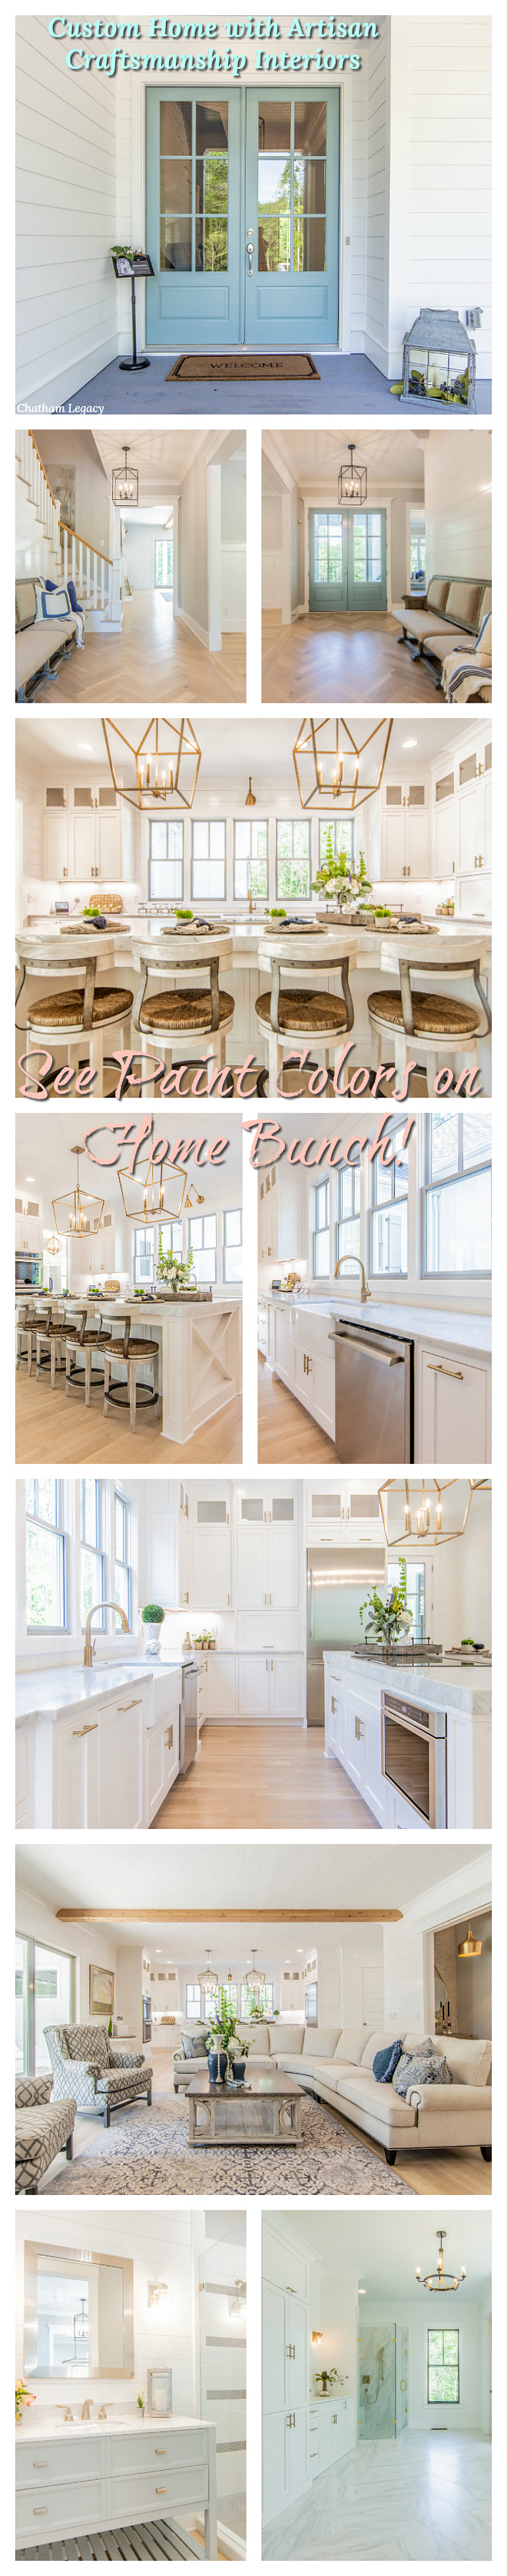 Custom Home with Artisan Craftsmanship Interiors paint colors and decor on Home Bunch